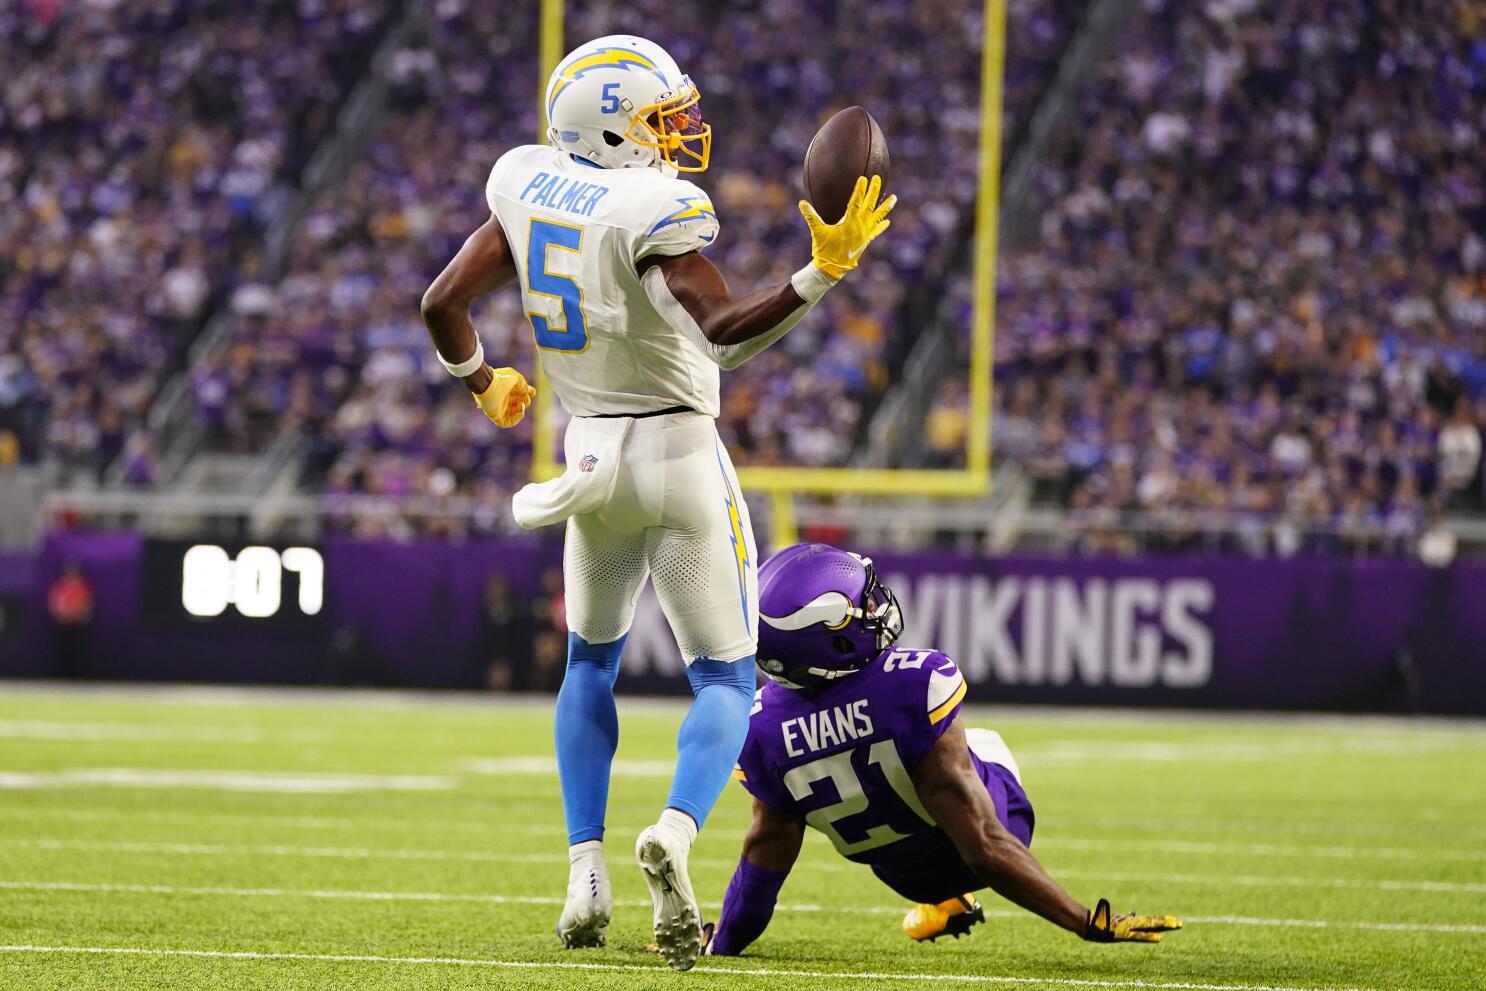 The Vikings' defense finally gets the job done, after a rough